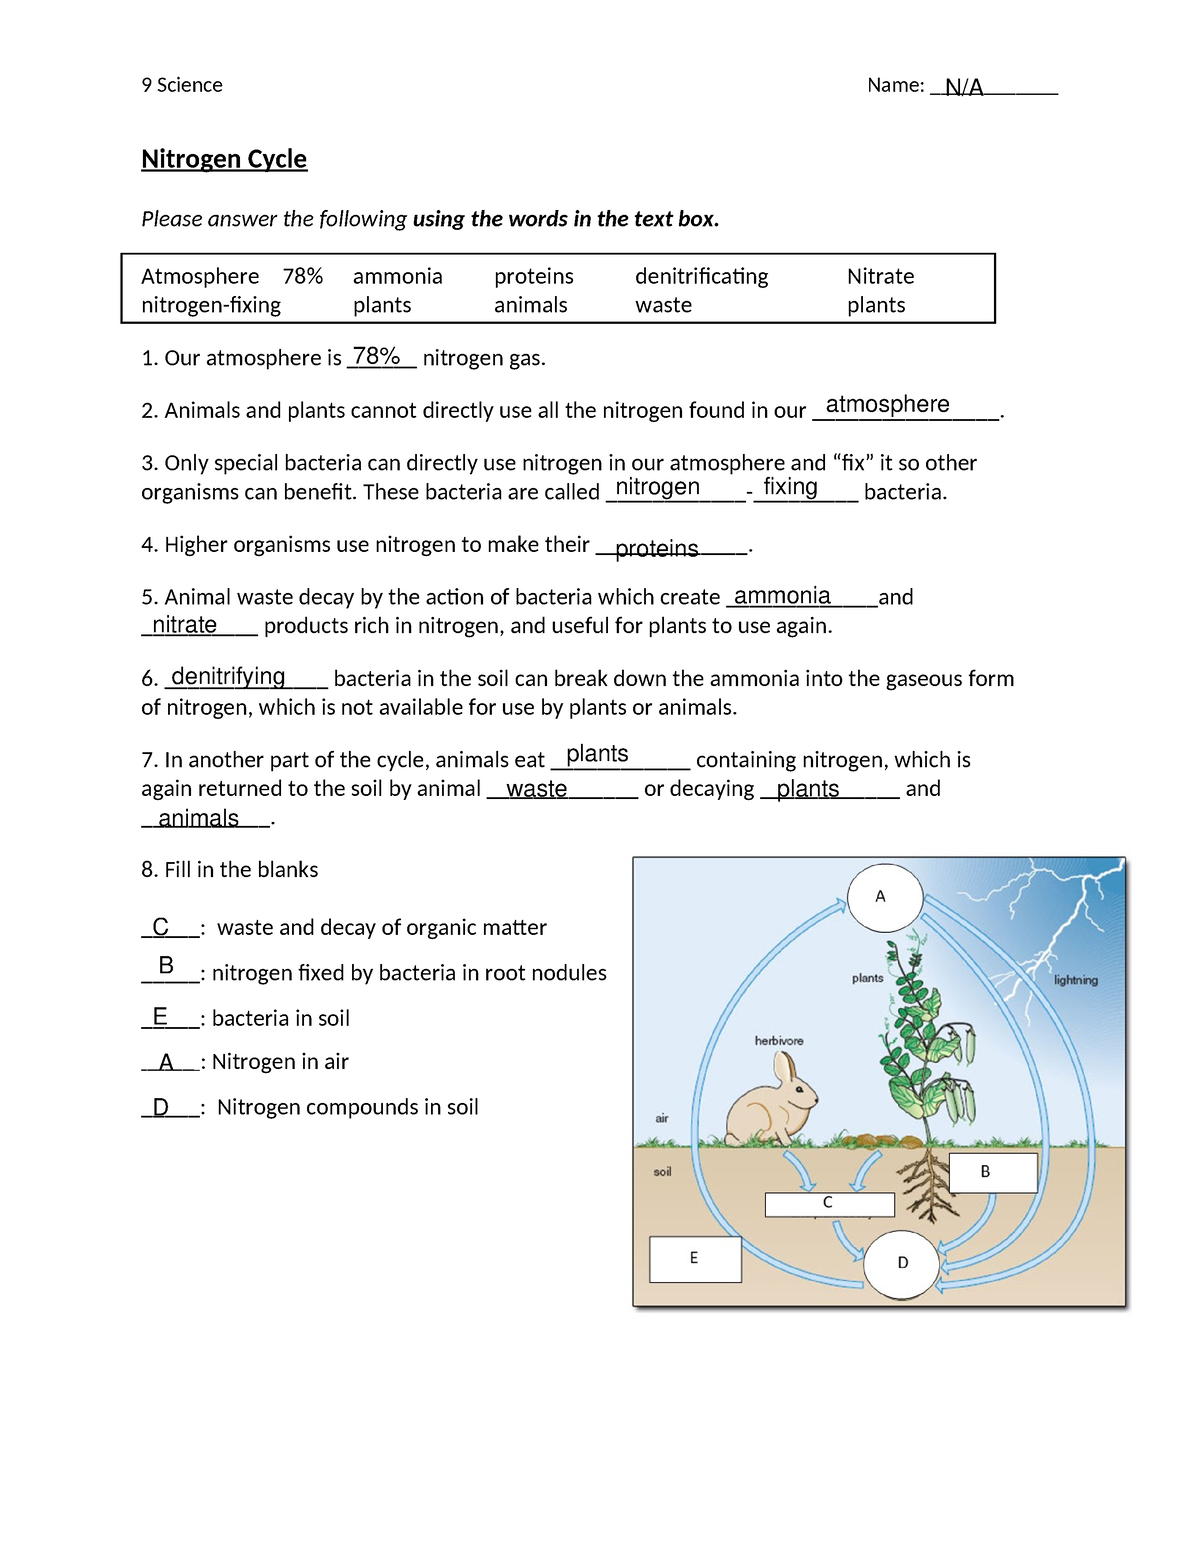 Nitrogen Cycle Worksheet 9 Science Name Nitrogen Cycle Please Answer The